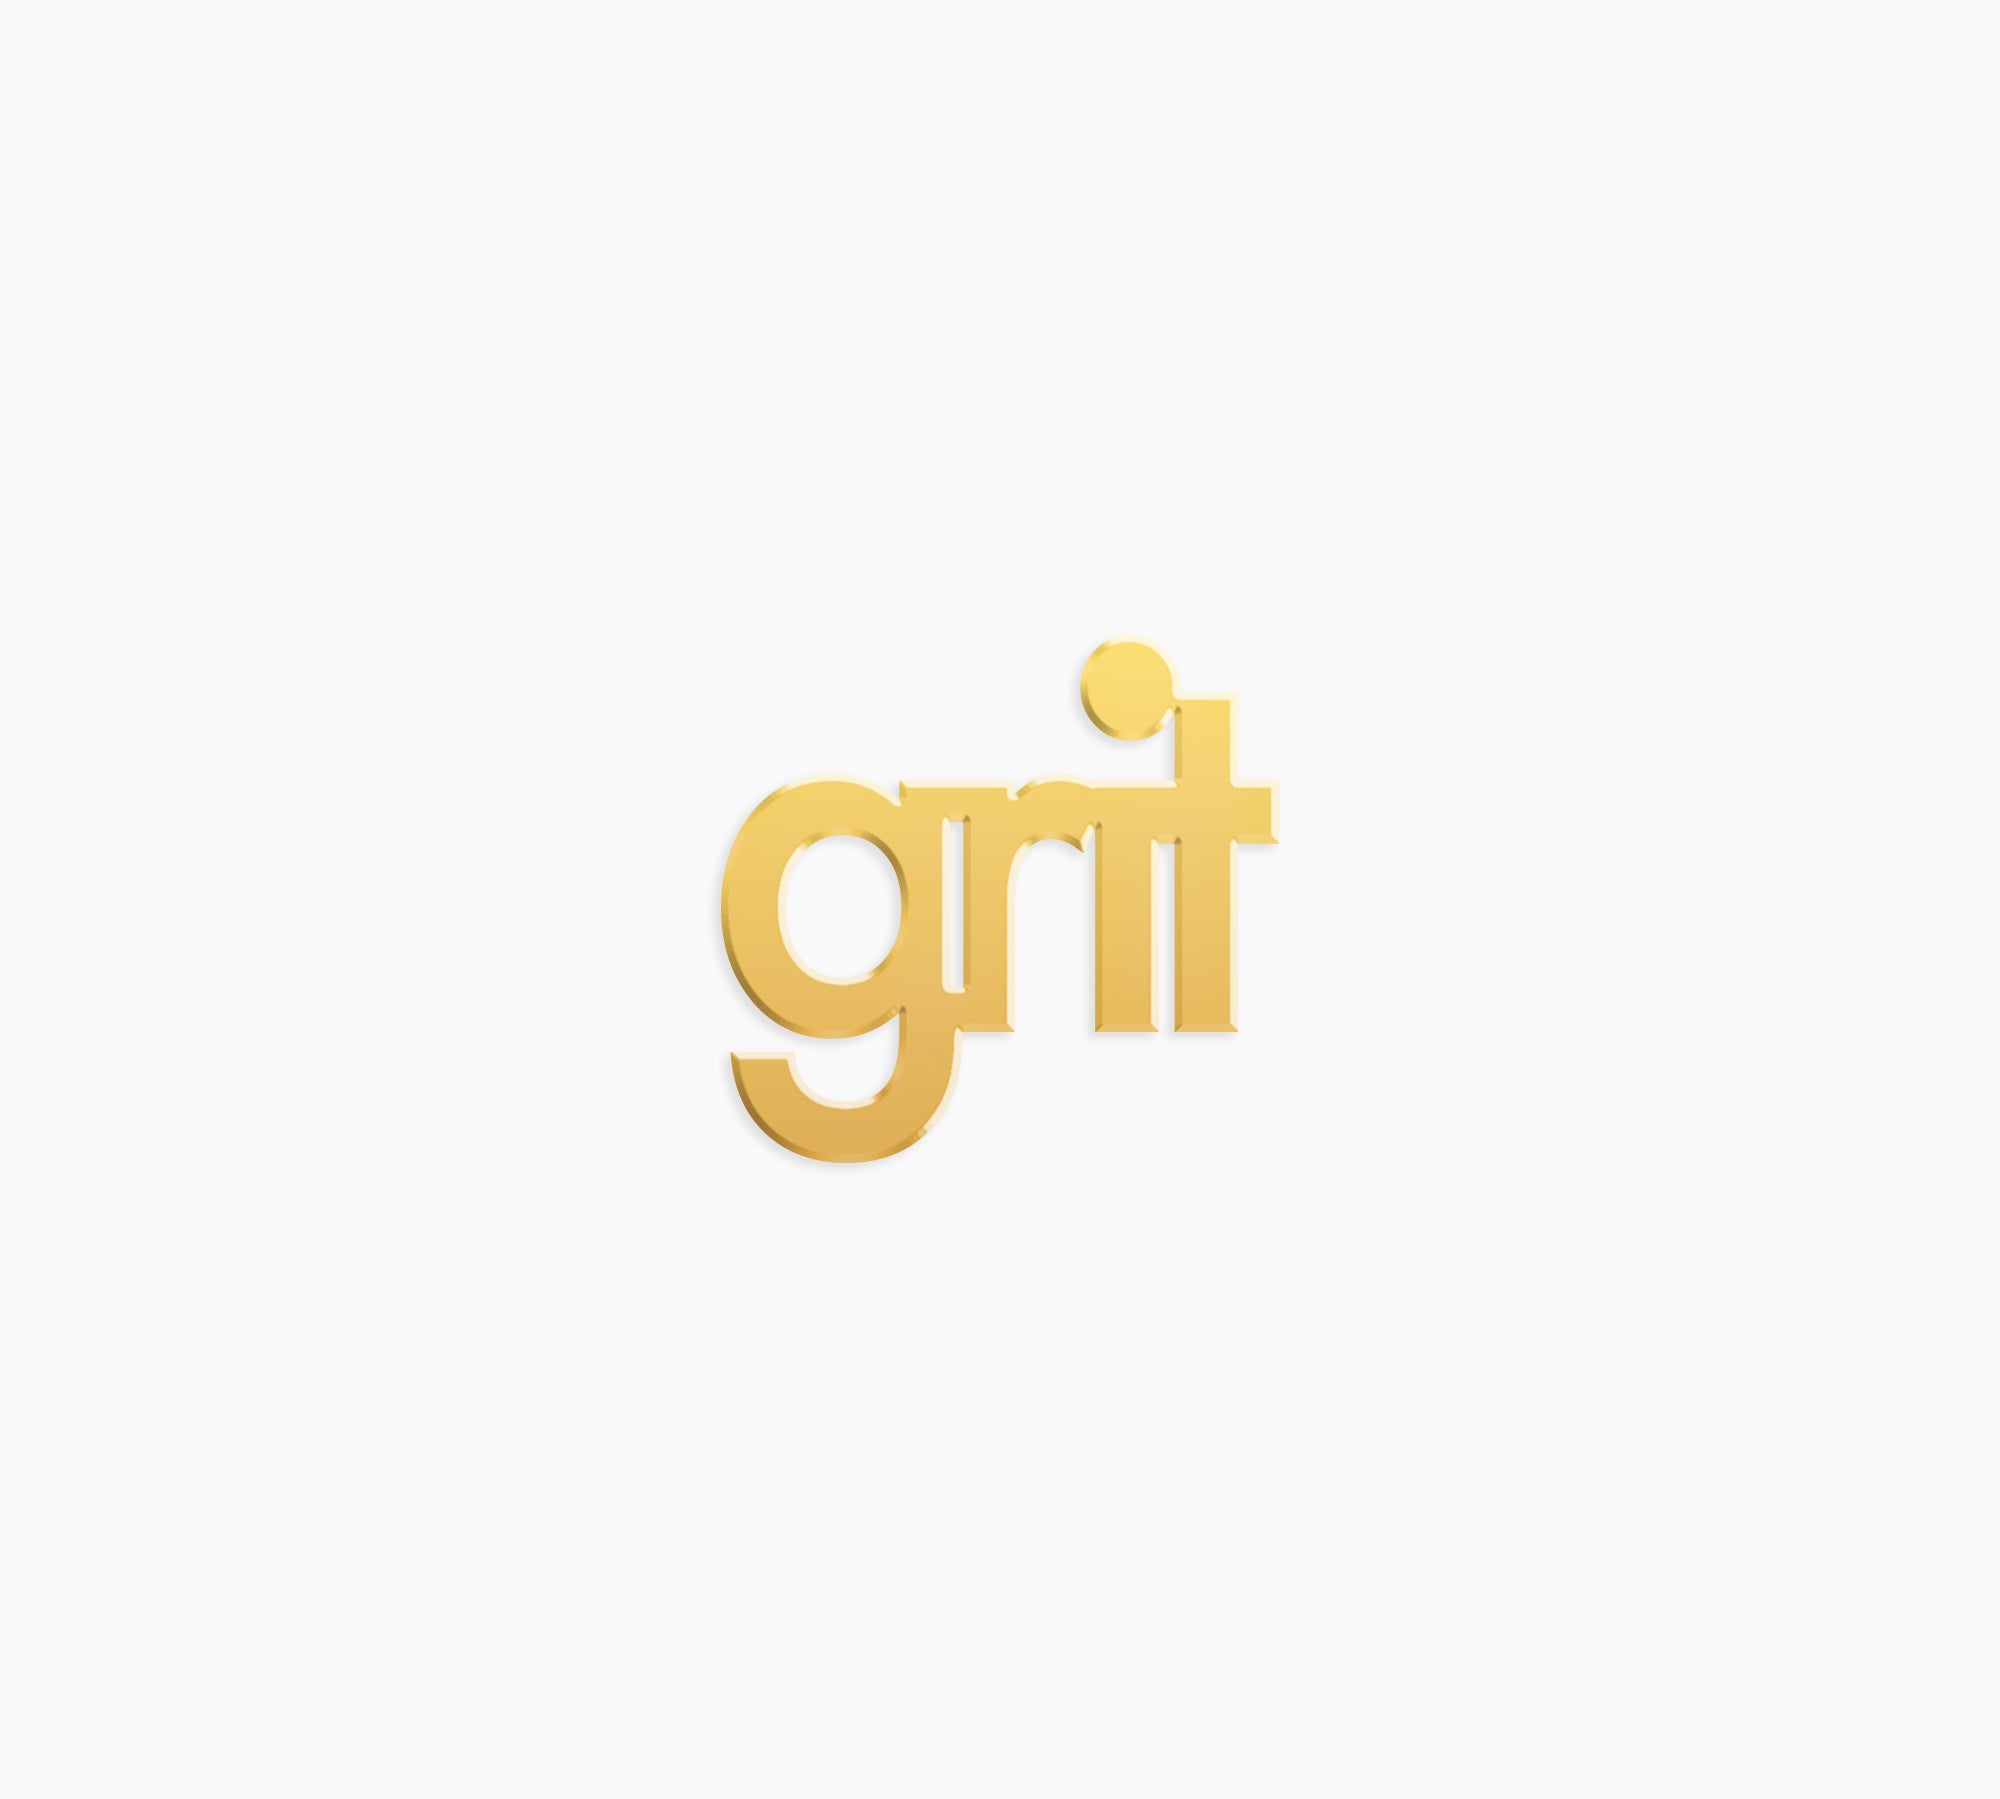 Grit Word Charm - High Quality, Affordable, Empowering, Self Love, Mantra Individual Charm for a Custom Locket - Available in Gold and Silver - Made in USA - Brevity Jewelry